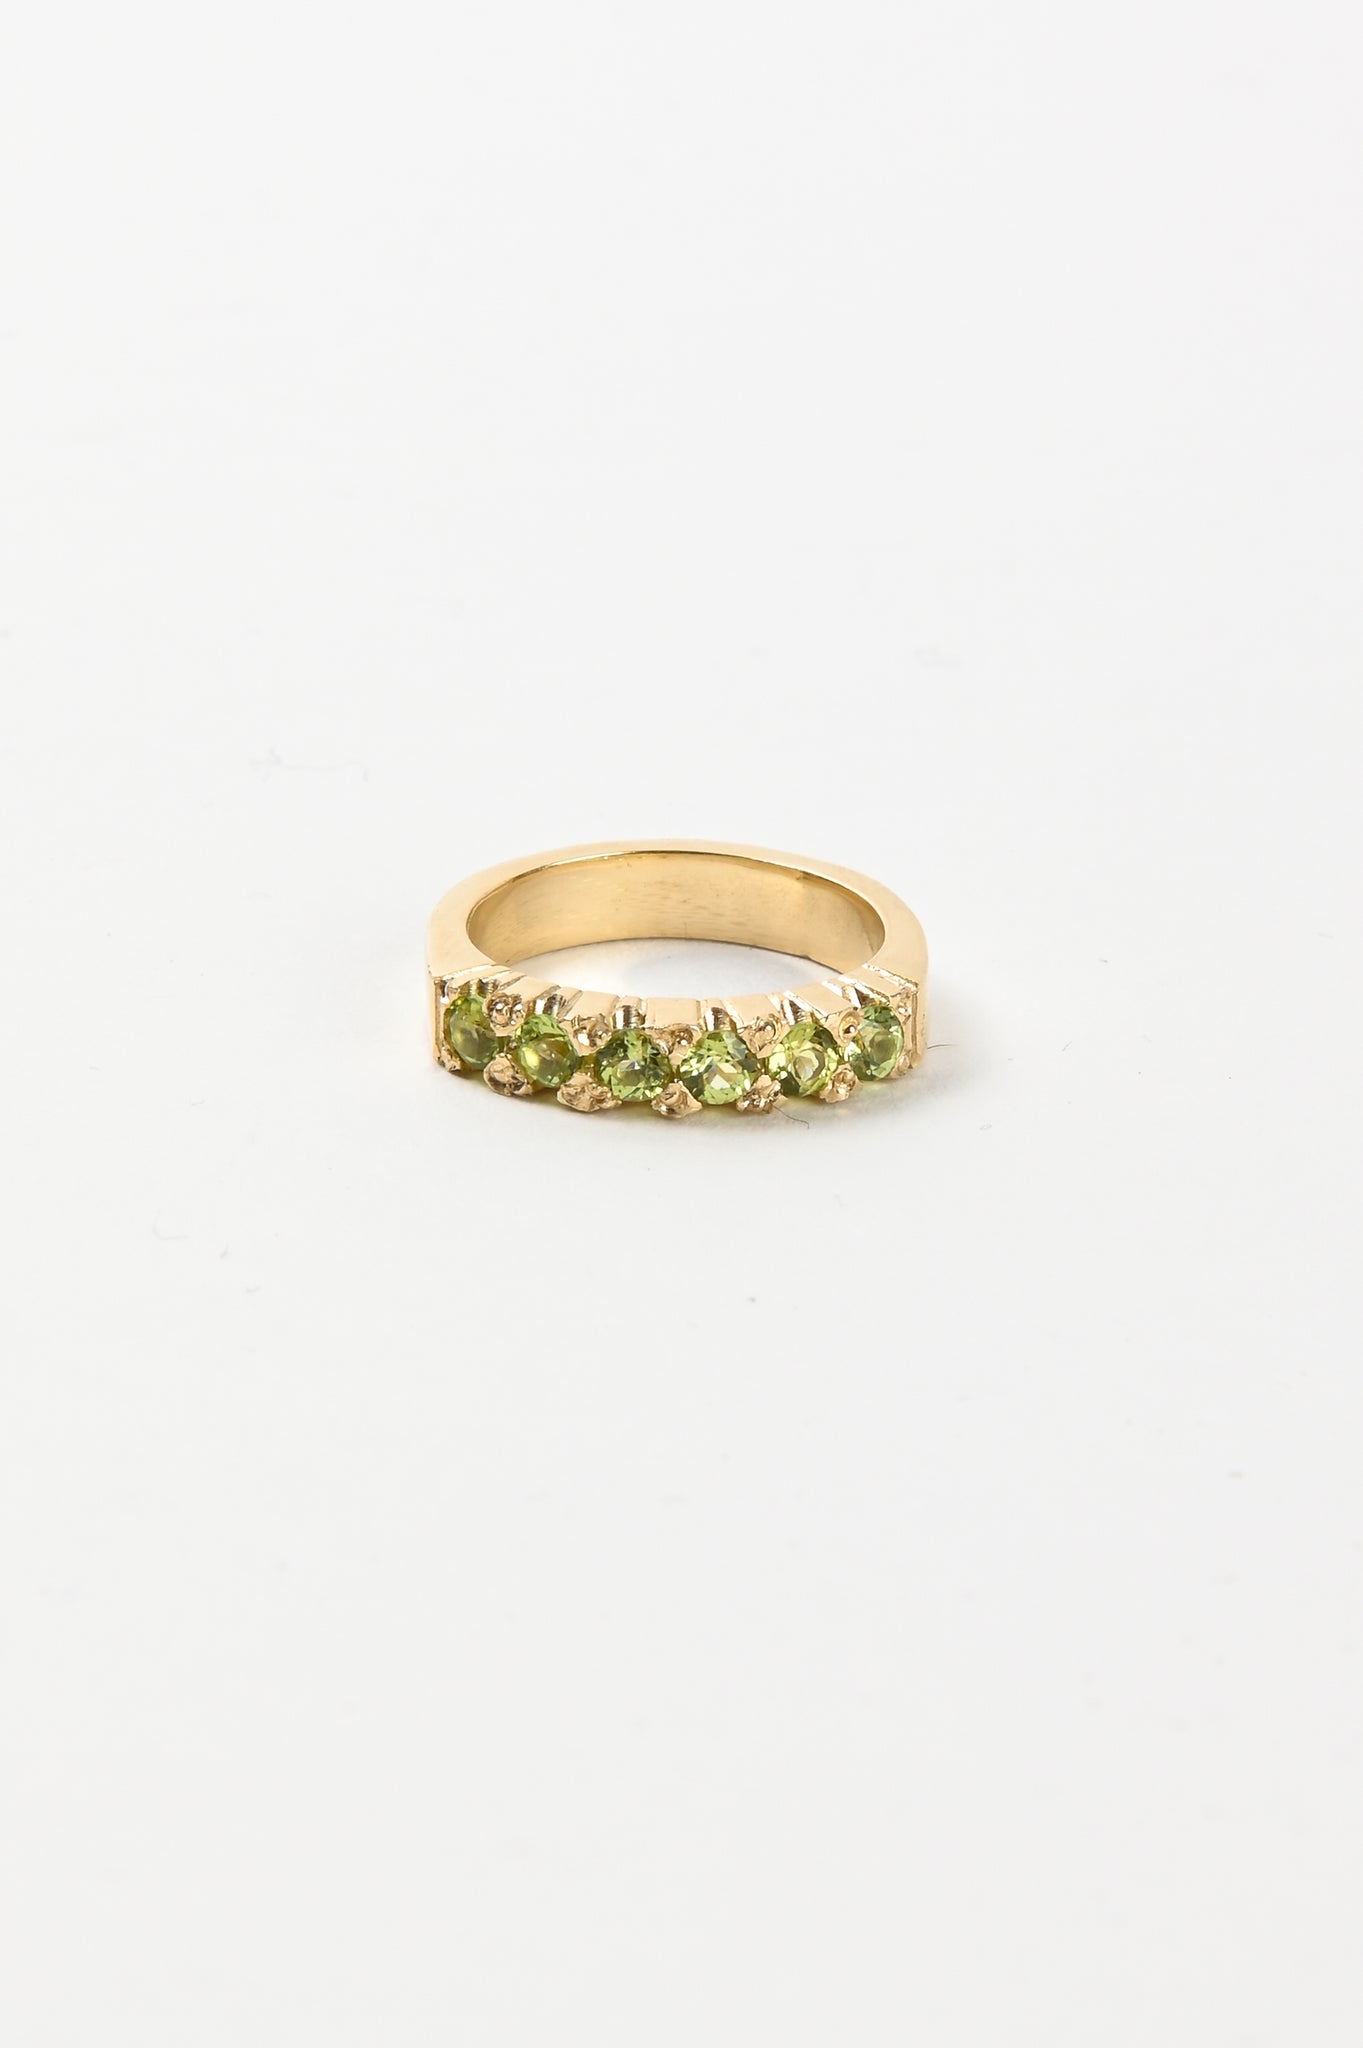 Oliver Thomas 'Ever' Ring With Peridot In 9ct Gold